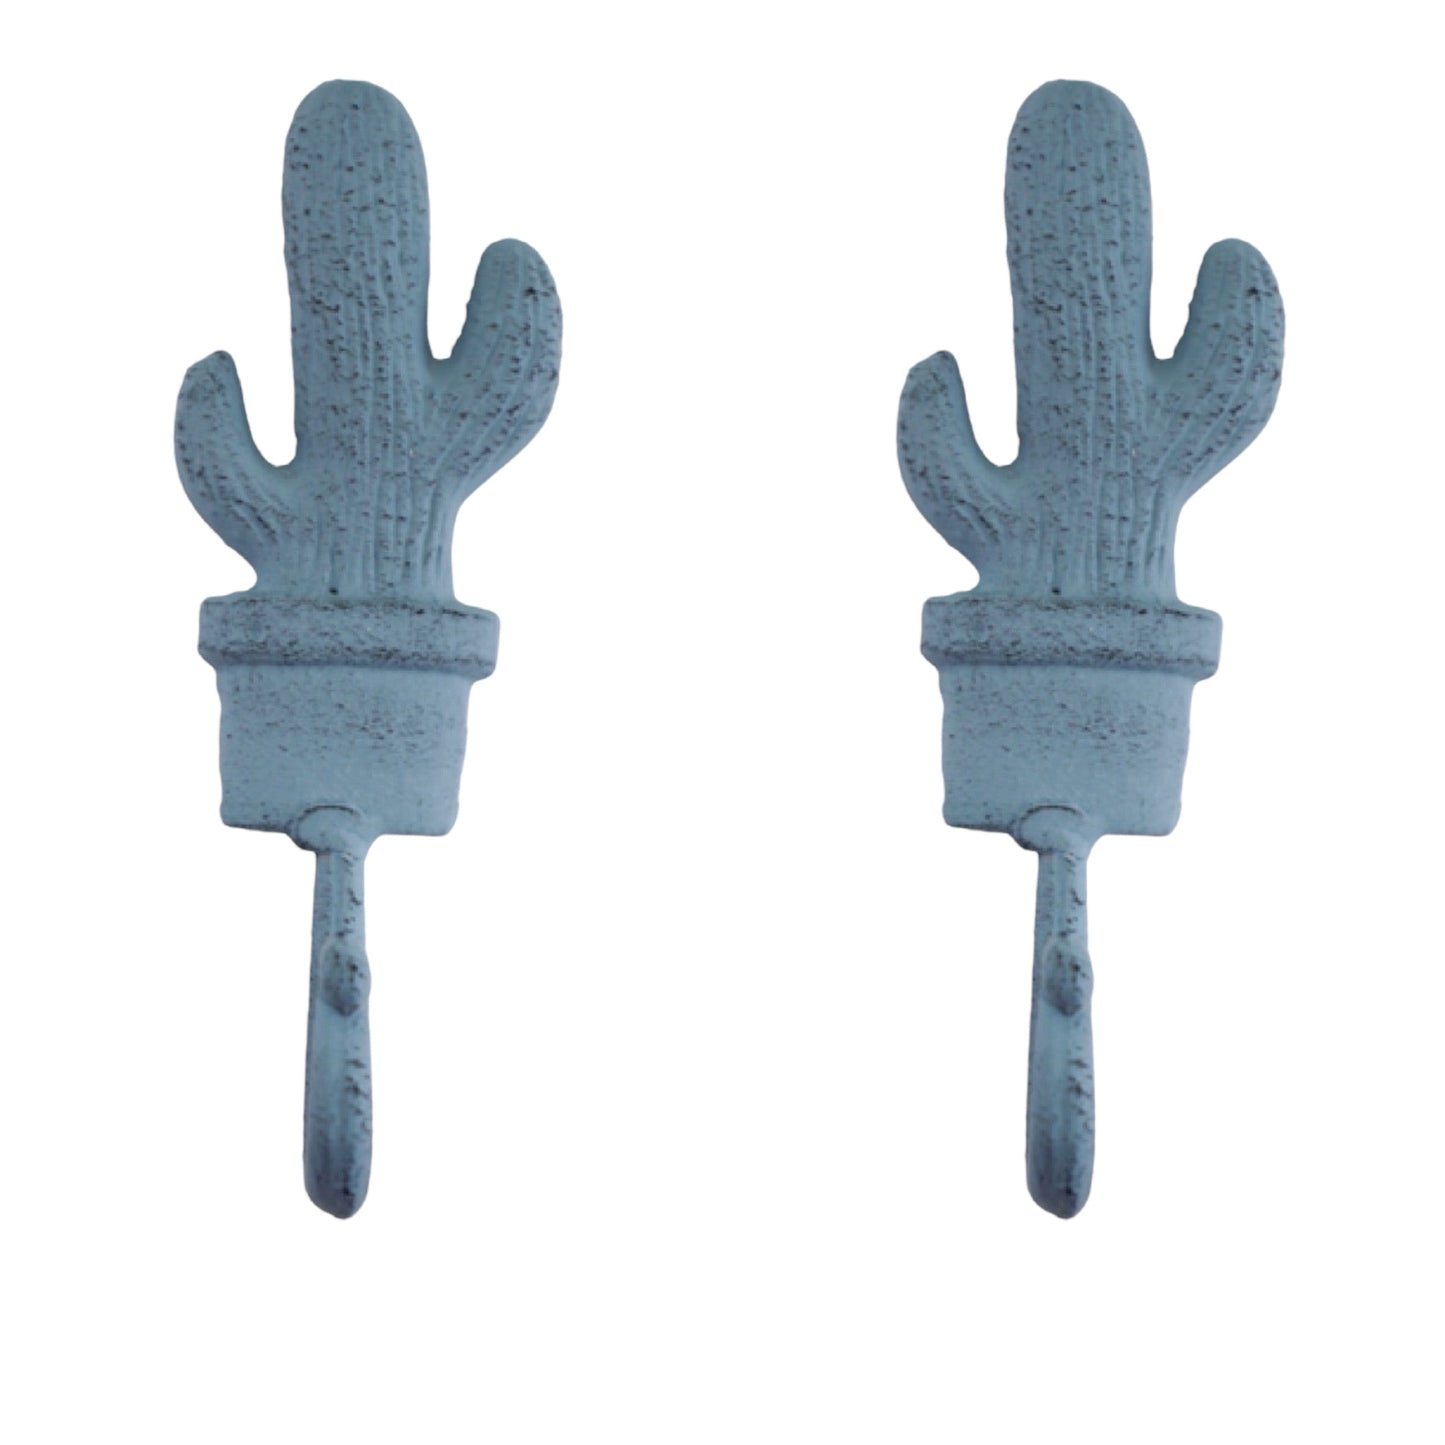 Hook Cactus Blue Set of 2 - The Renmy Store Homewares & Gifts 